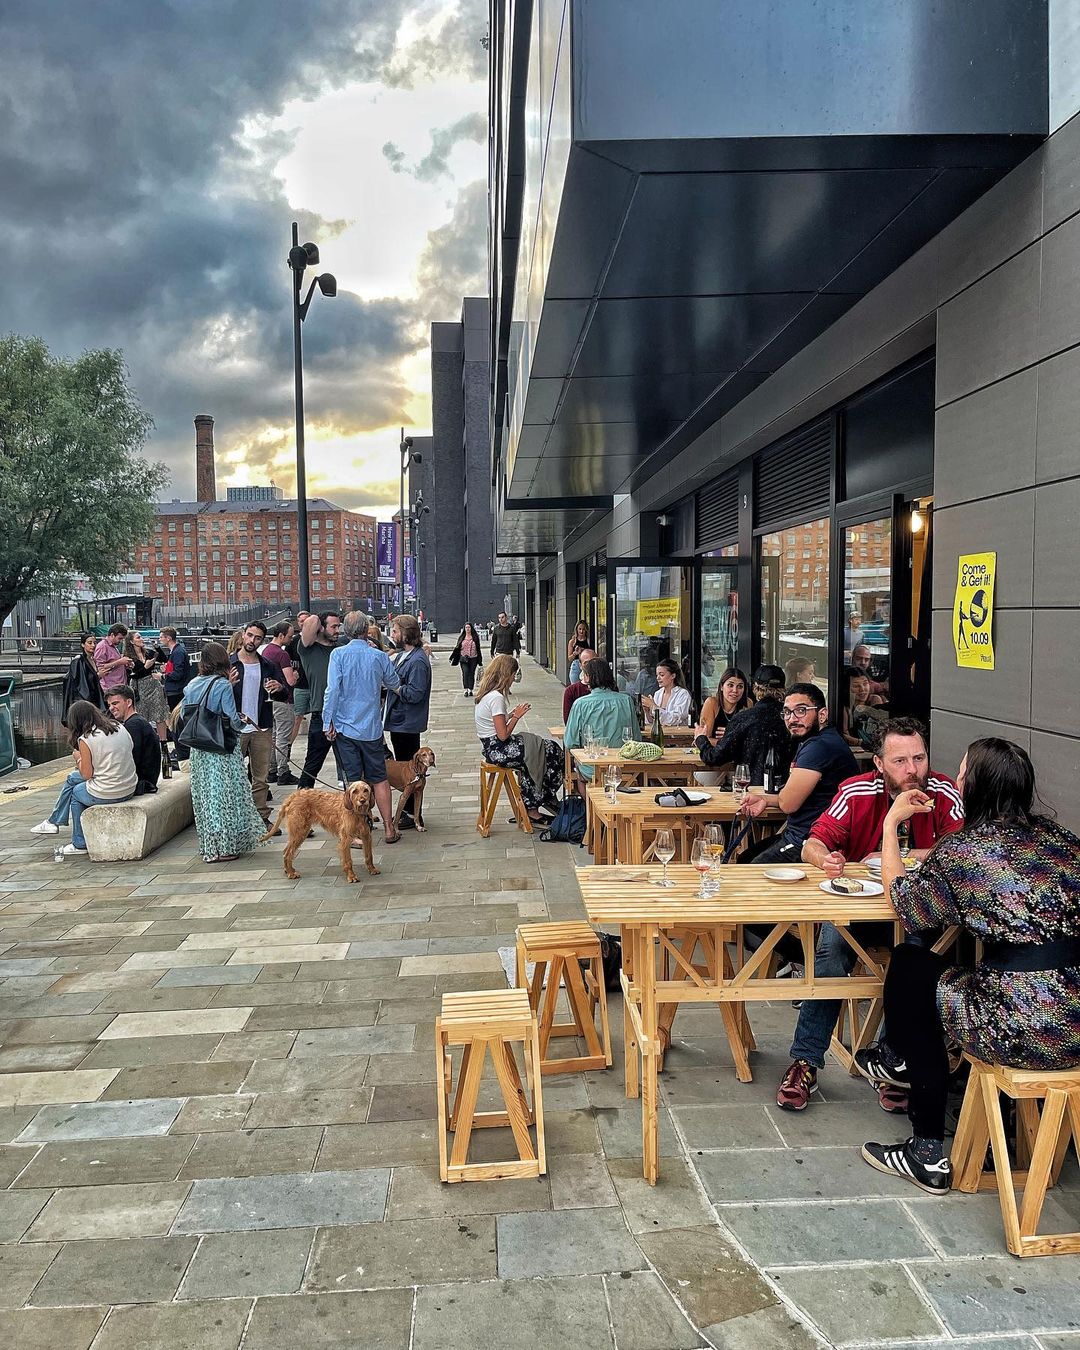 NEW MANC EATS feat. waterside wine bar Flawd and the return of MFDF, The Manc